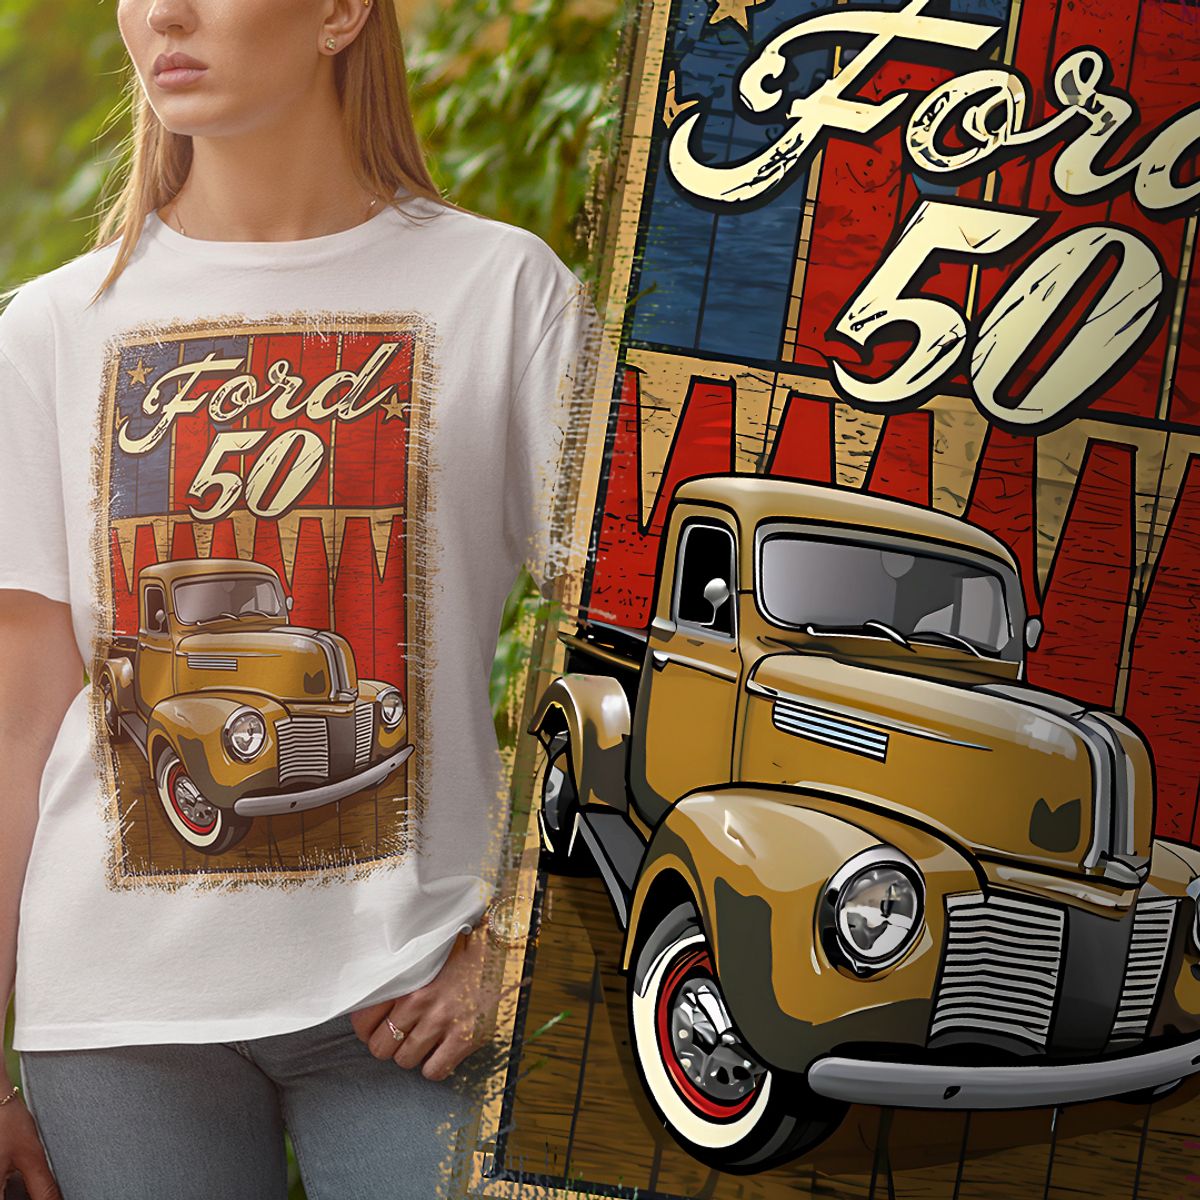 Nome do produto: T-SHIRT OLD CARS FORD 50